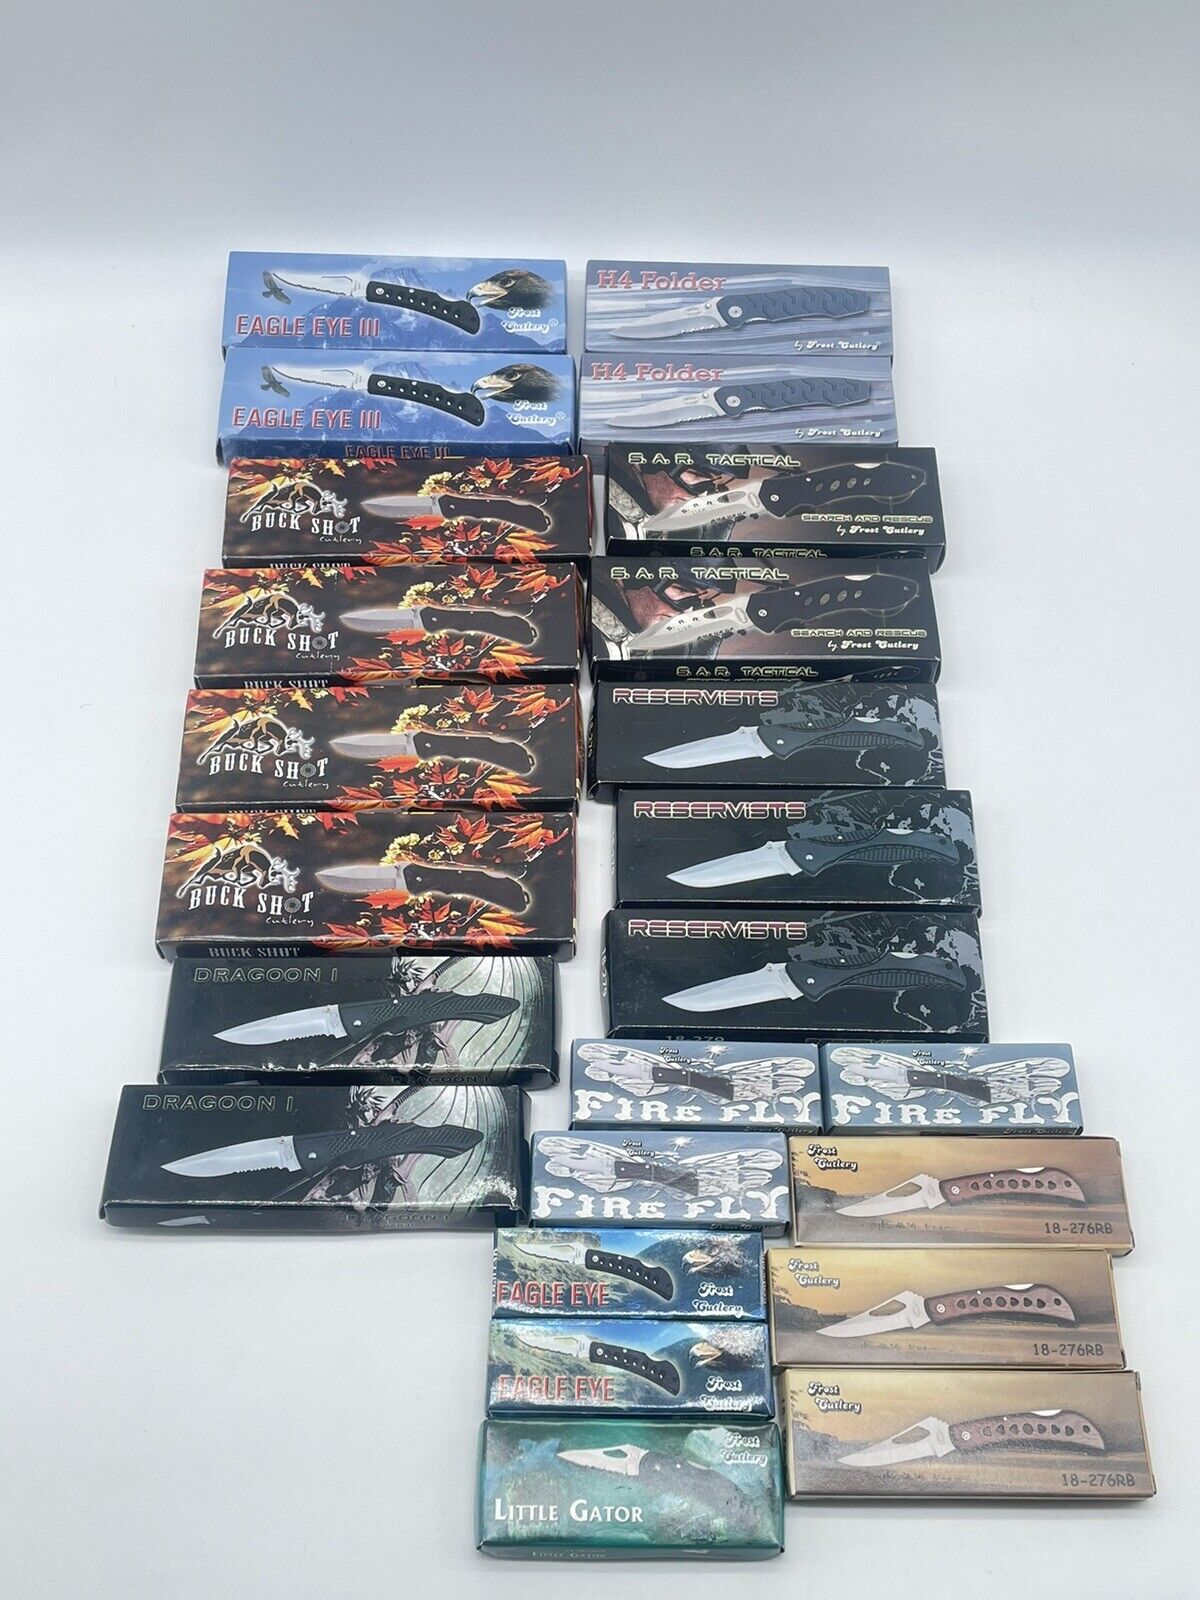 Lot of 24 Pocket Knives/Knives - Frost Cutlery - New In Boxes Wholesale Knives